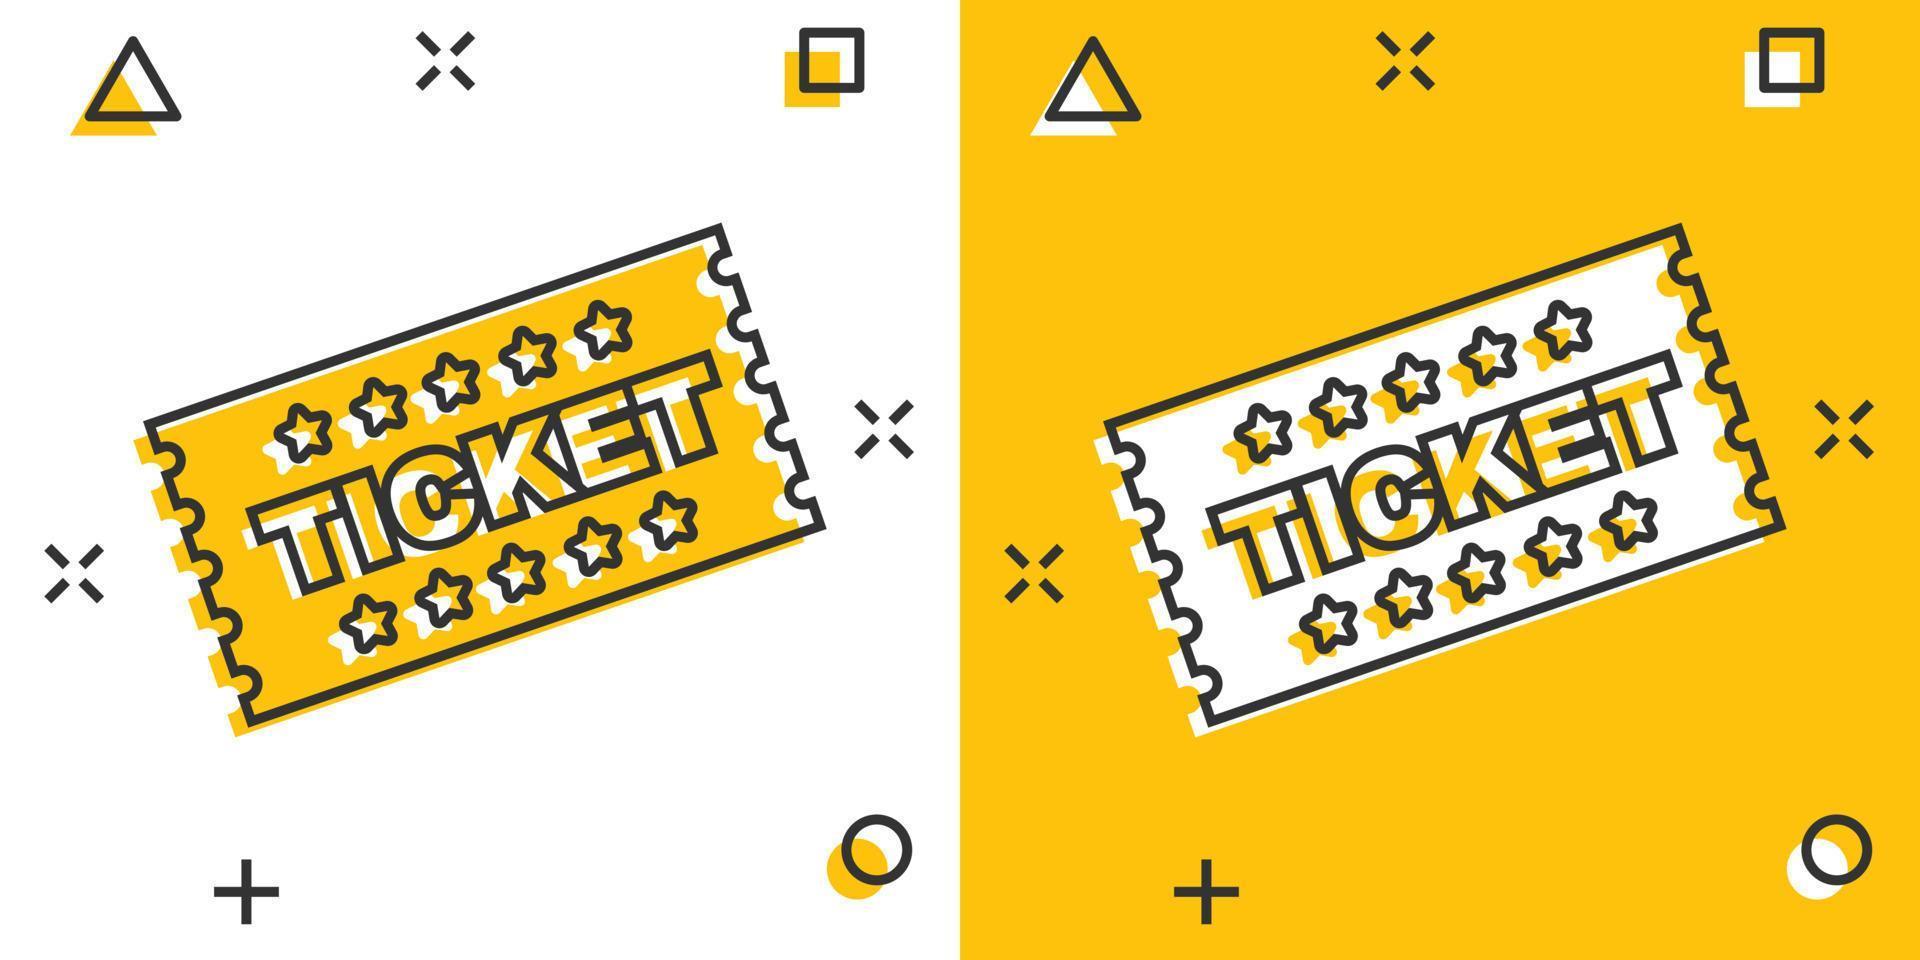 Cartoon ticket icon in comic style. Admit one illustration pictogram. Admit one splash business concept. vector